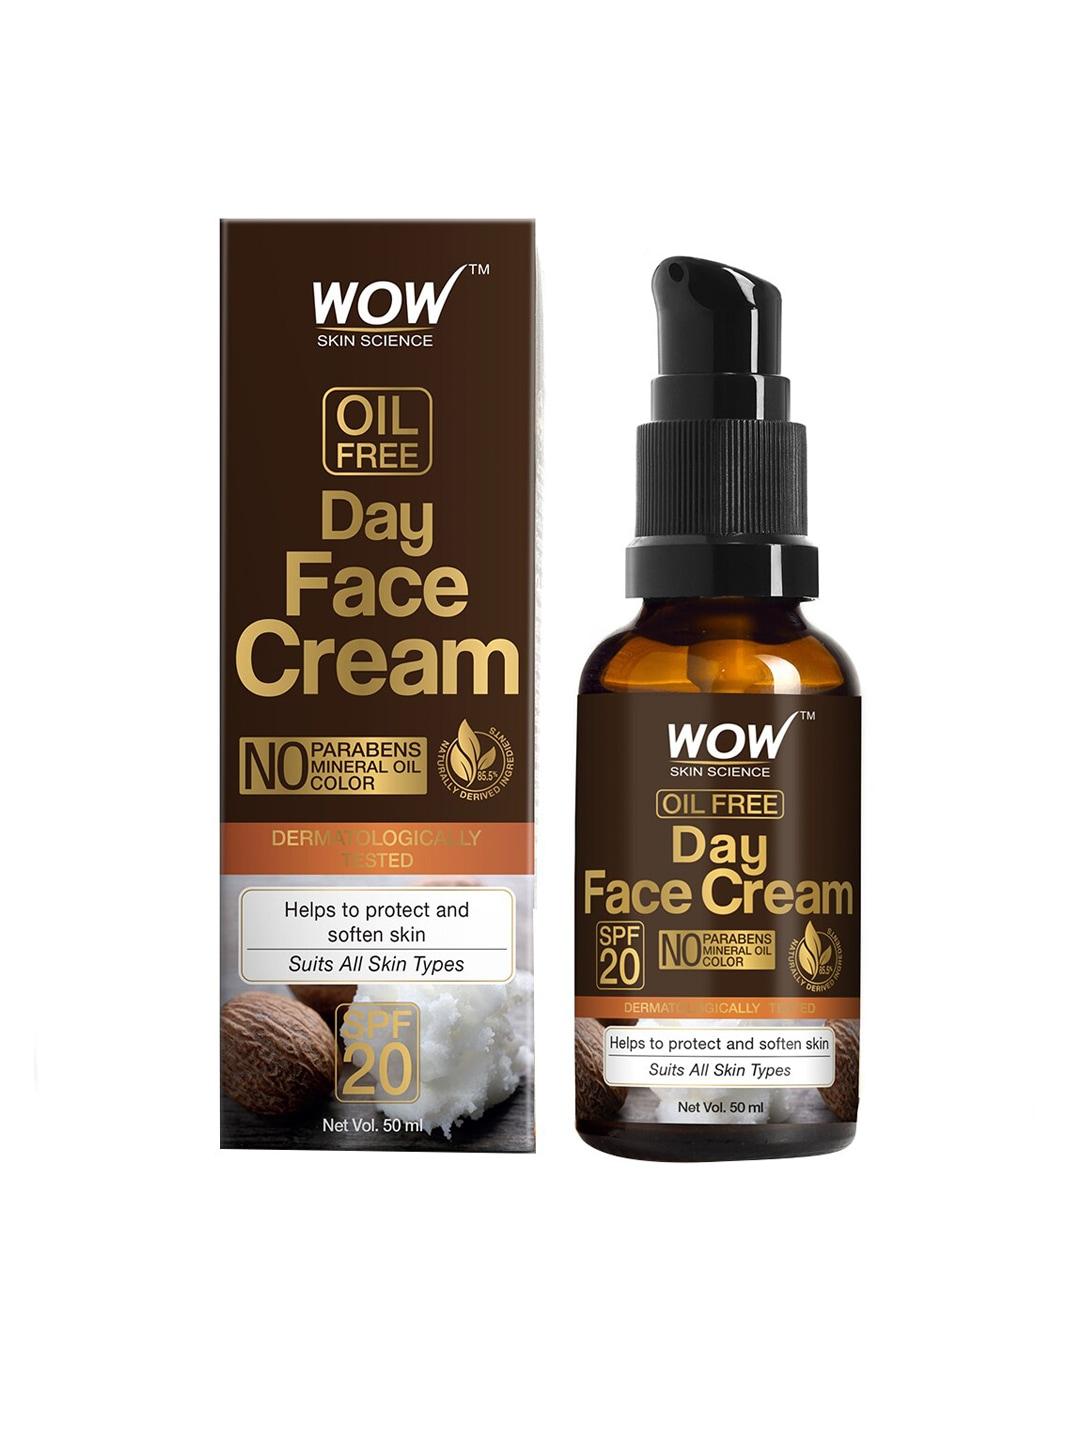 wow skin science day face cream - spf 20 - with rosehip oil & shea butter - oil free  50ml